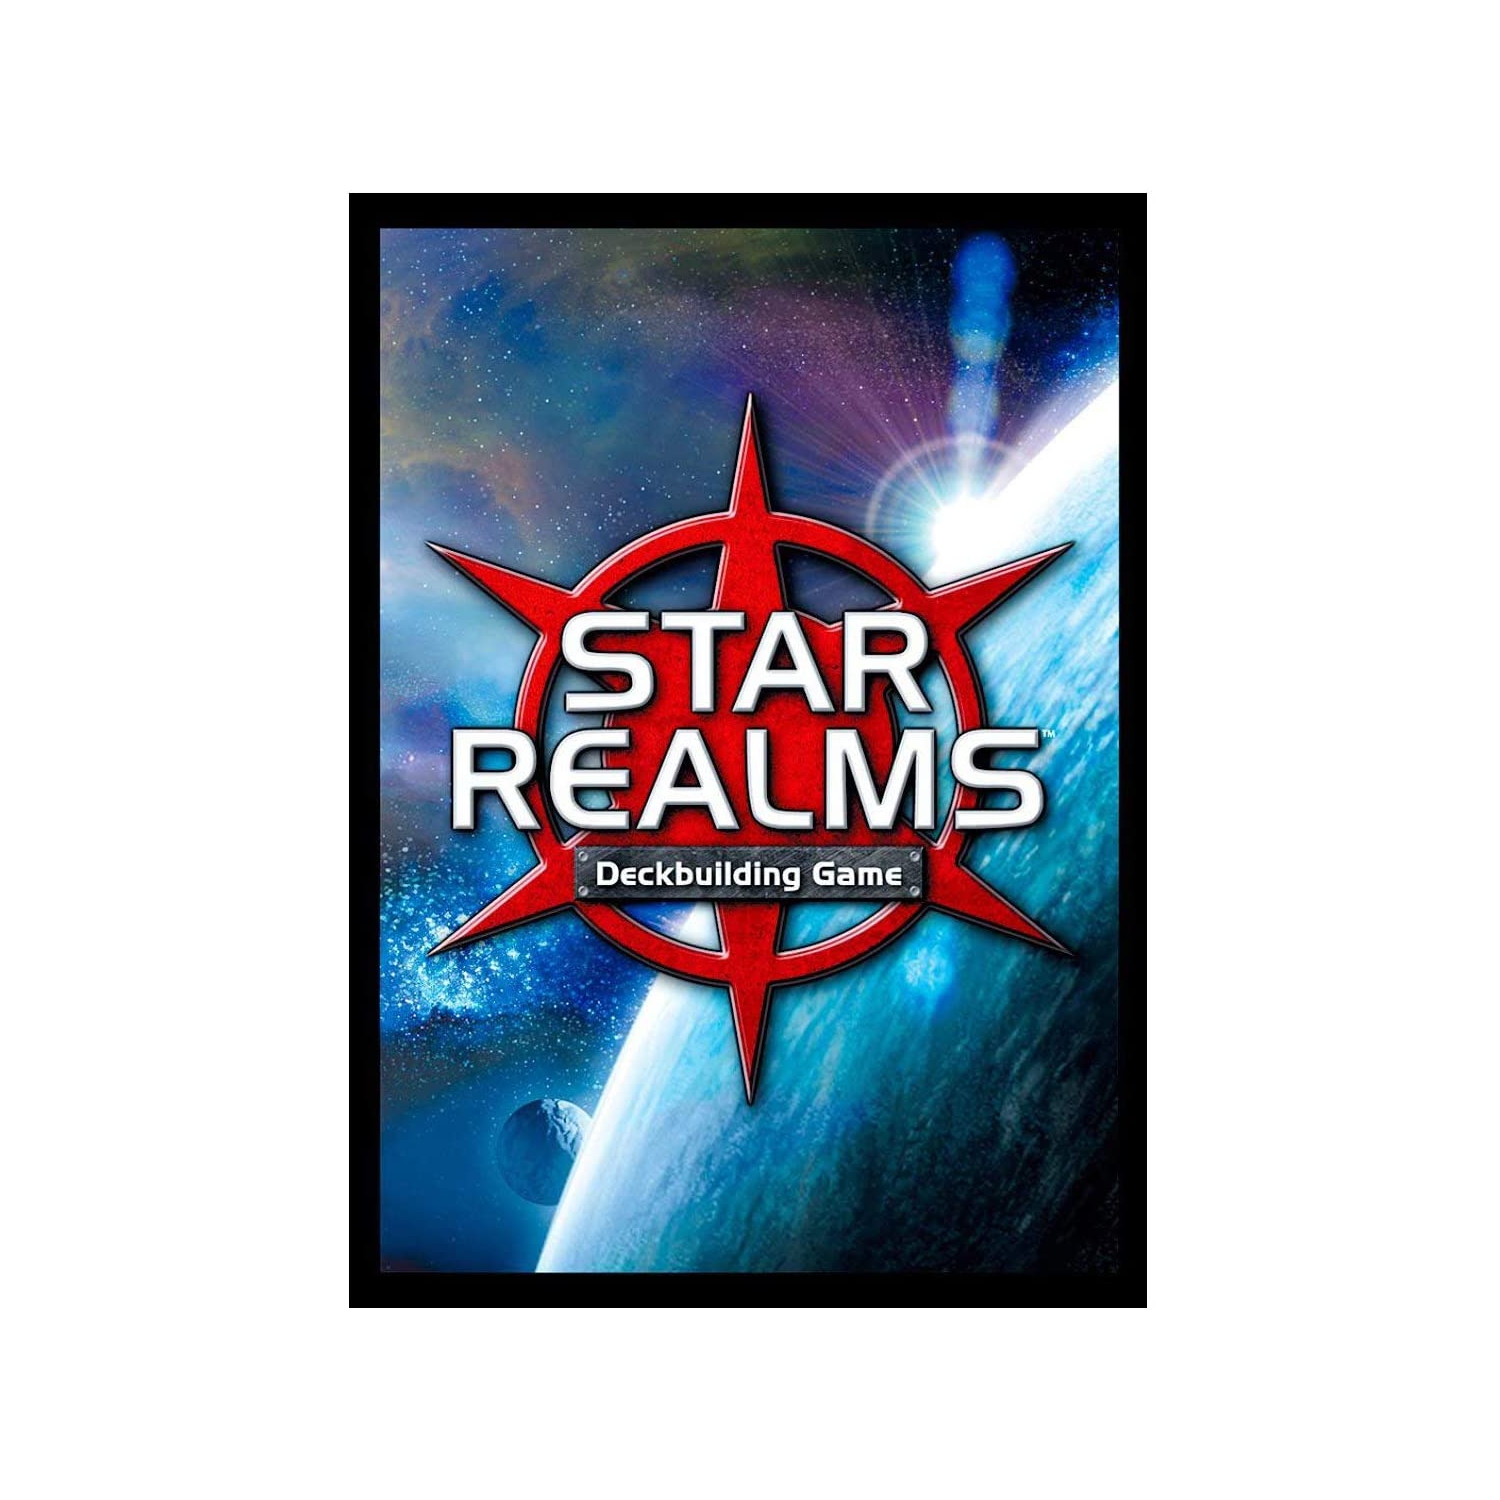 Card Sleeves Standard Size: Star Realms 60 Standard Size (67mm x 92mm) Sleeves Per Pack